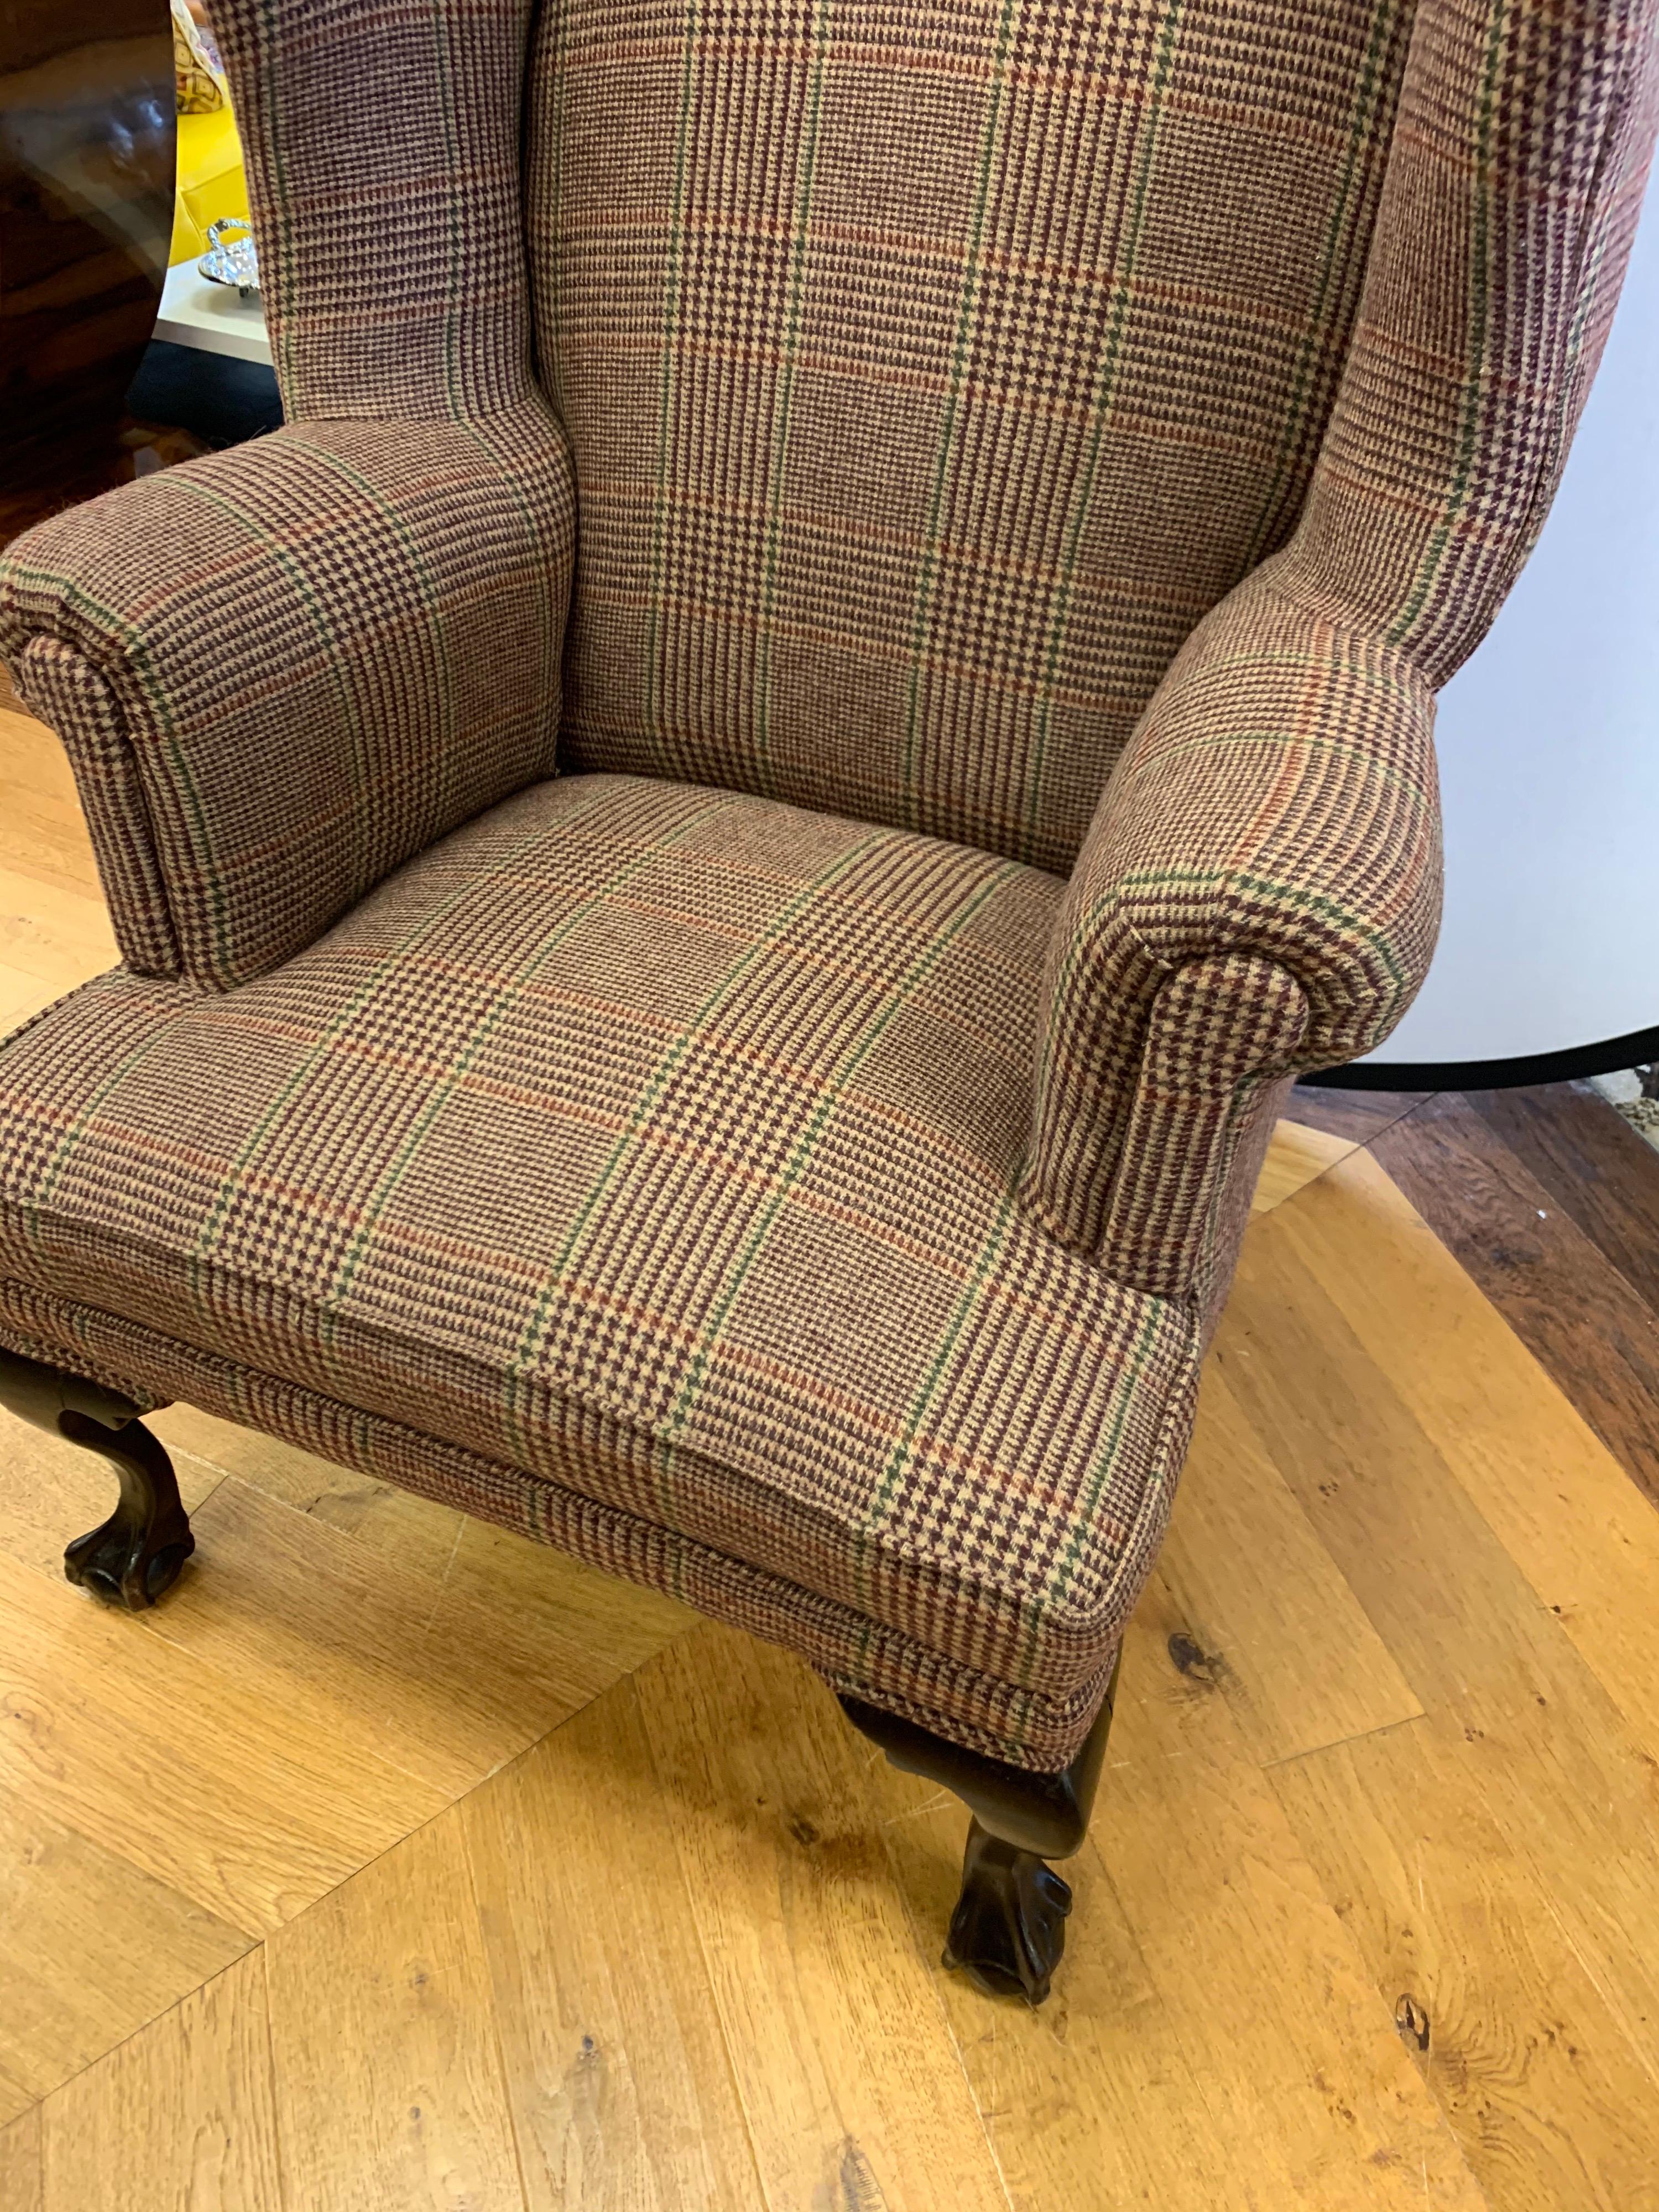 Magnificent Georgian antique wingback chair that has been newly reupholstered in the Ralph Lauren
tartan wool plaid fabric. The tartan plaid fabric melds perfectly with the dark, rich mahogany ball and claw legs.